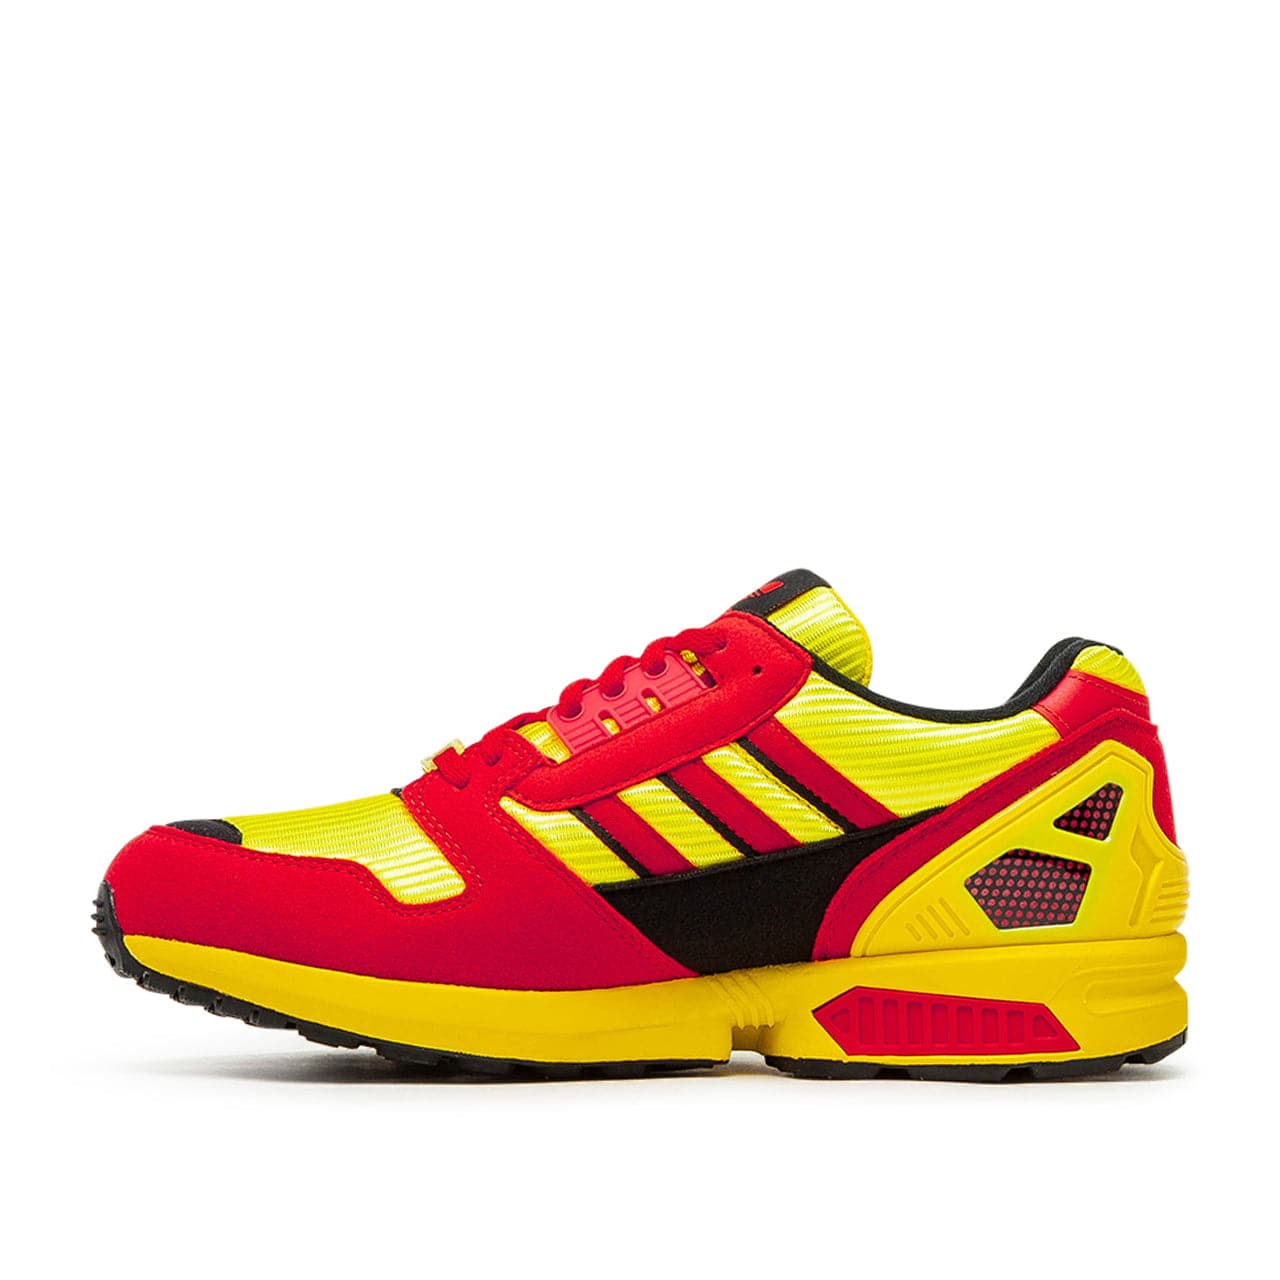 adidas ZX 8000 Germany 'Bring Back Pack' (Gelb / Rot / Schwarz)  - Allike Store